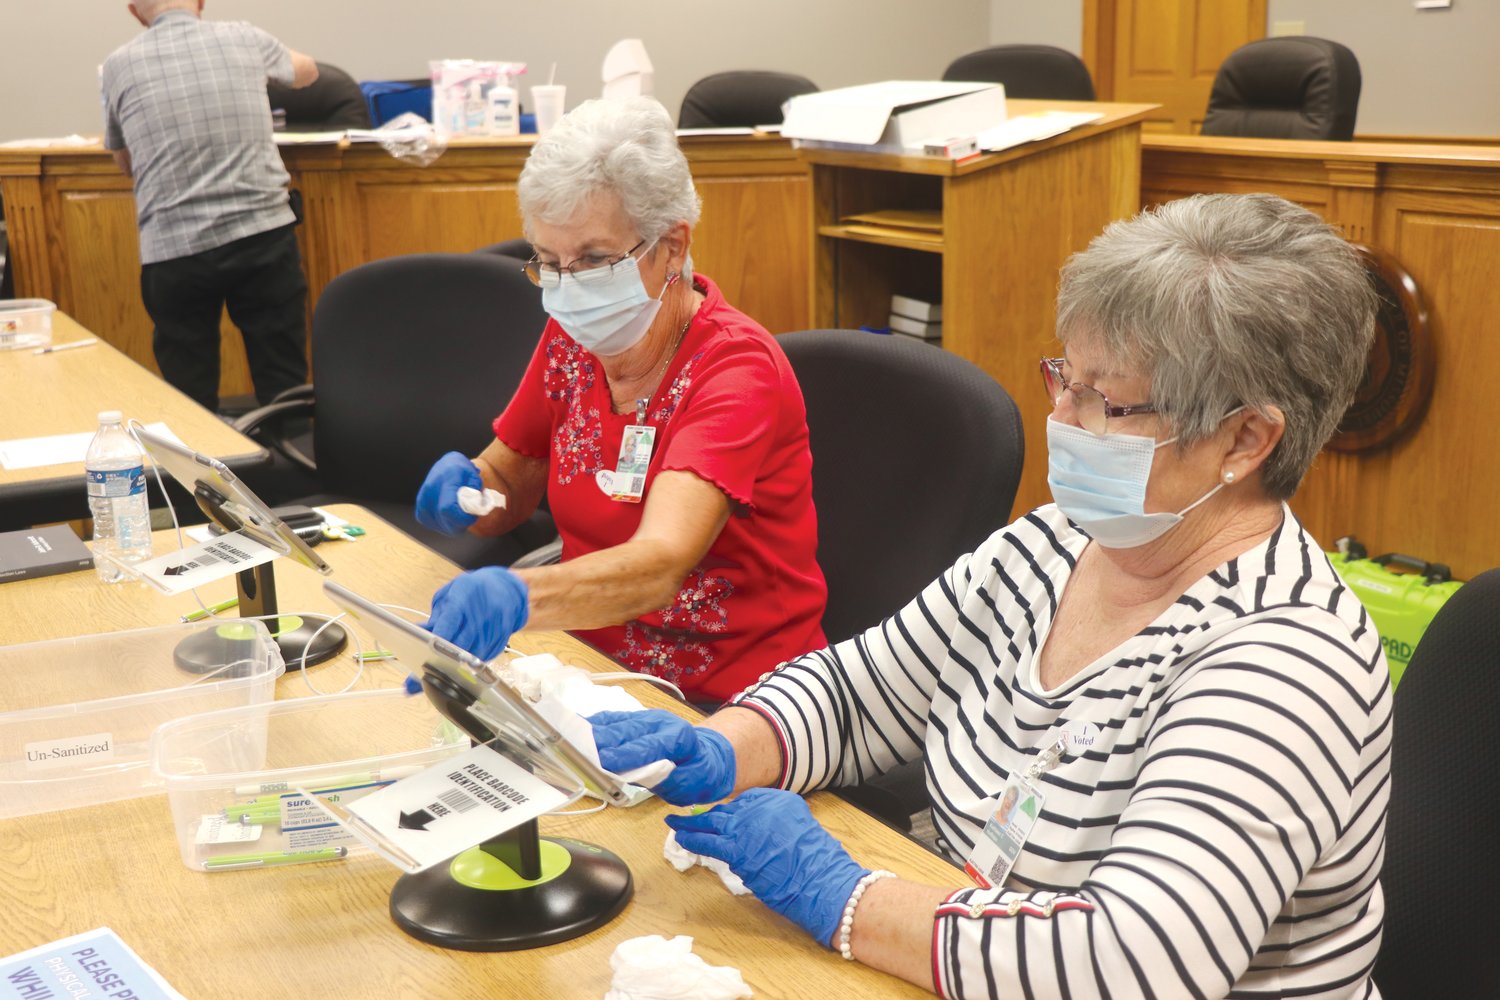 Perry County election workers Margie Winschel (left) and Kathy Hoffman disinfect and sanitize the pens and the sign-in screen as they wait between voters at City Hall during the August primary election on Aug. 4, 2020.  Voters at the polls for Tuesday's general election can expect to see the same public health protocols in place.